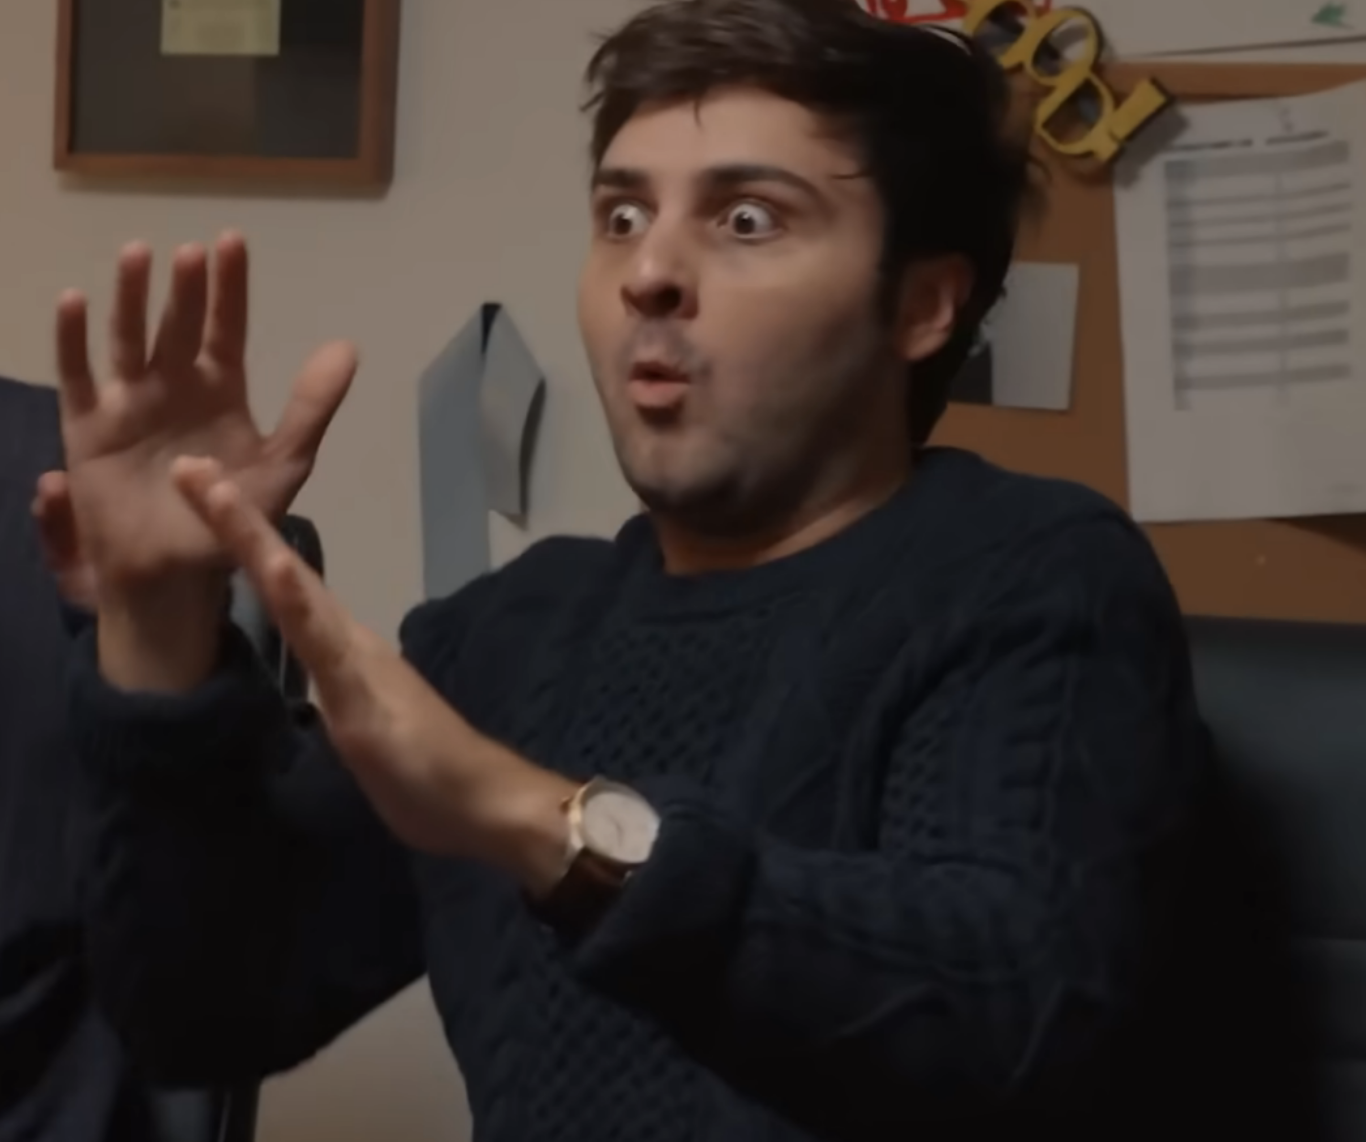 A man with his hands up looking shocked